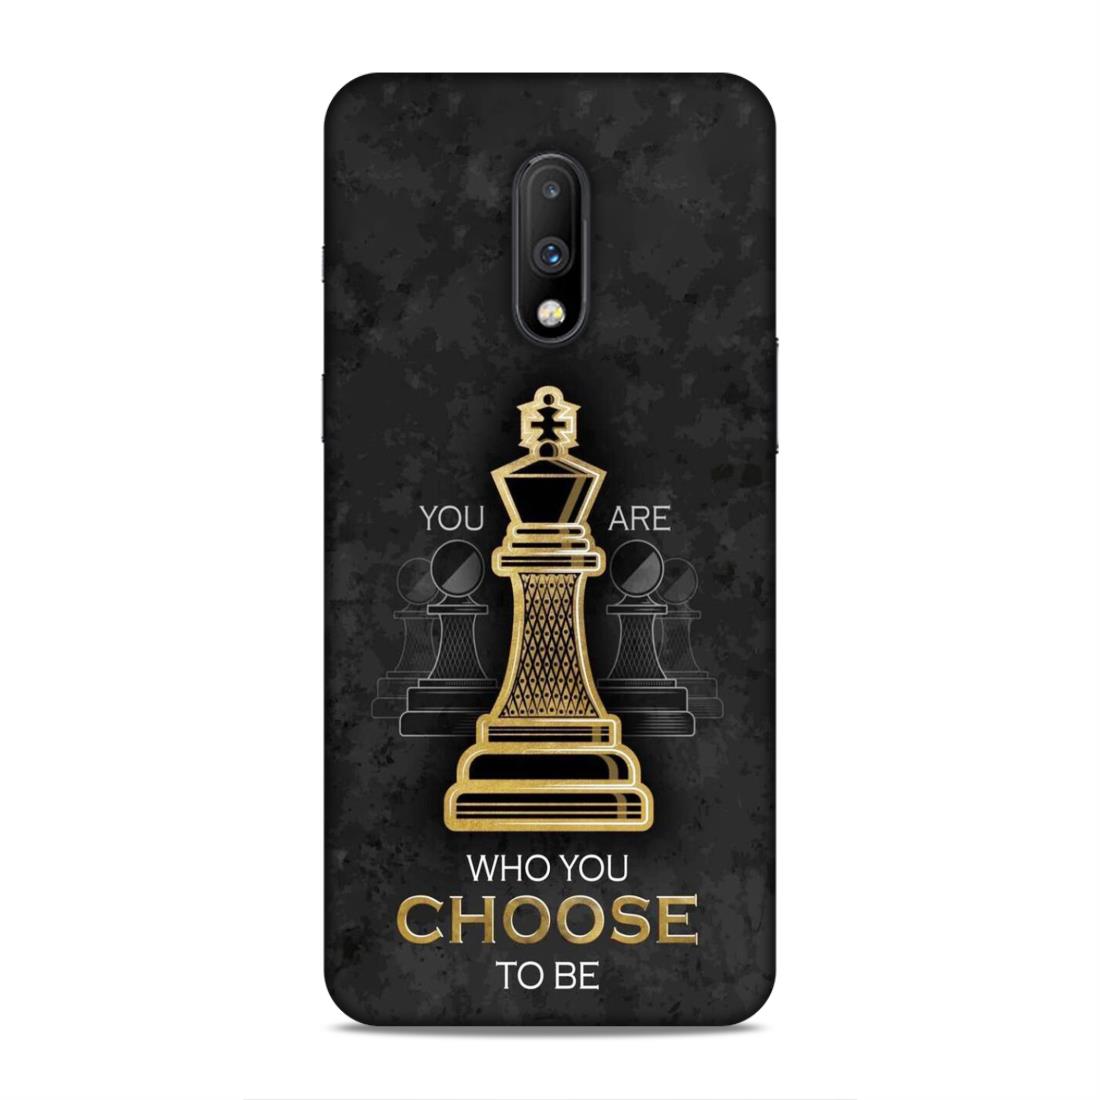 Who You Choose to Be Hard Back Case For OnePlus 6T / 7